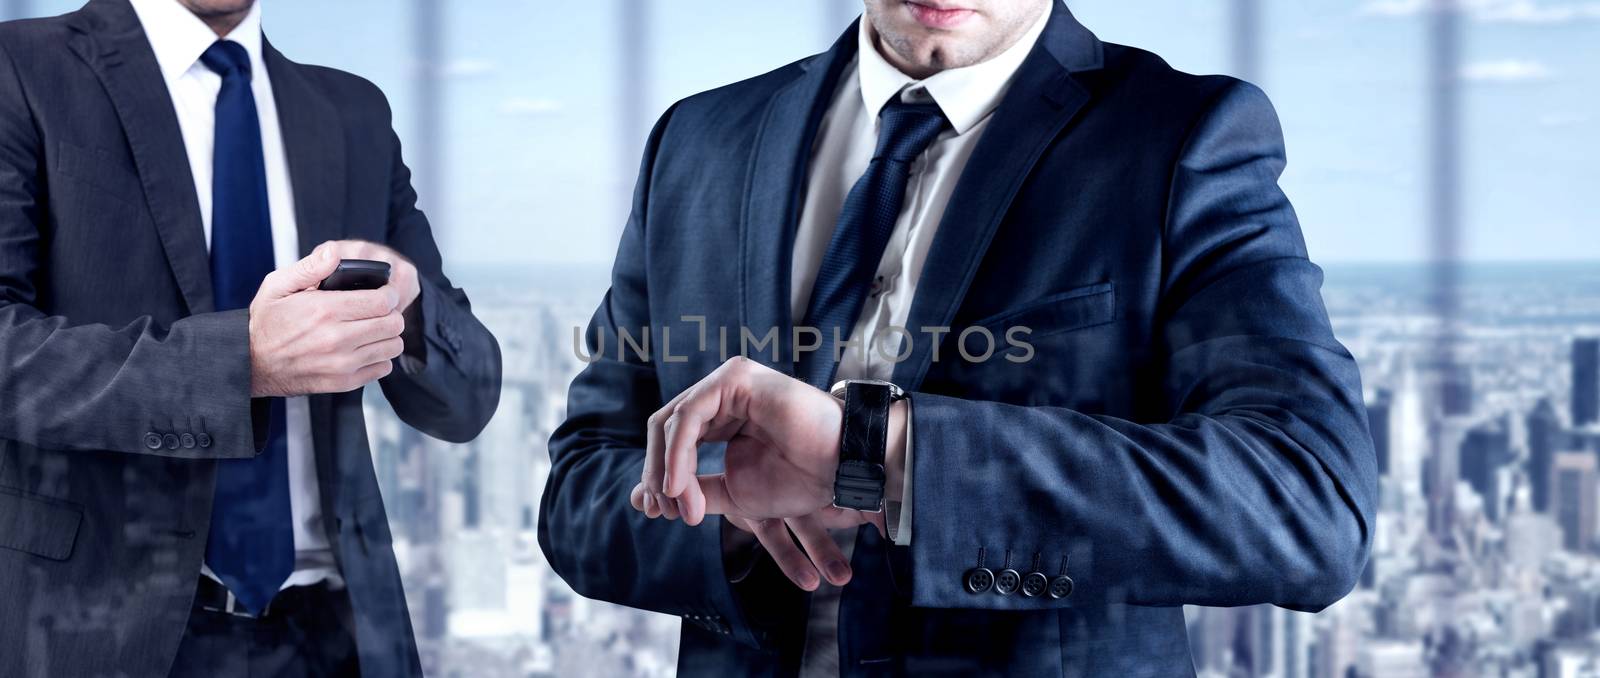 Focused businessman texting on his mobile phone against room with large window looking on city